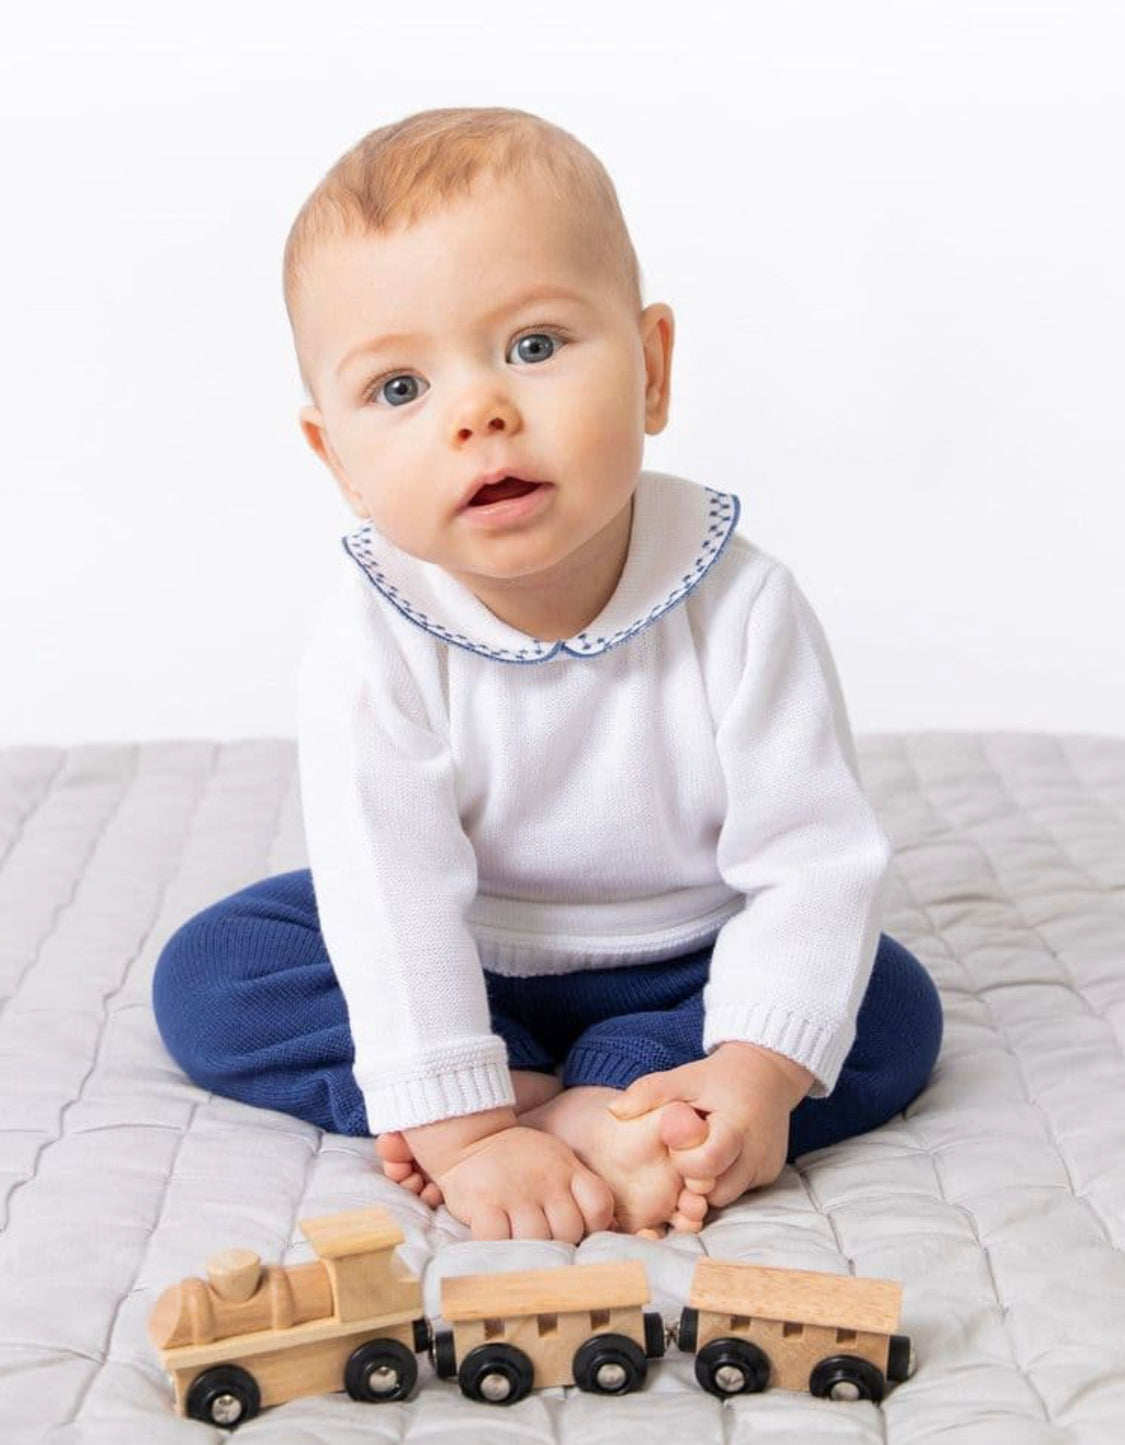 Baby Knitted Top & Trousers Set